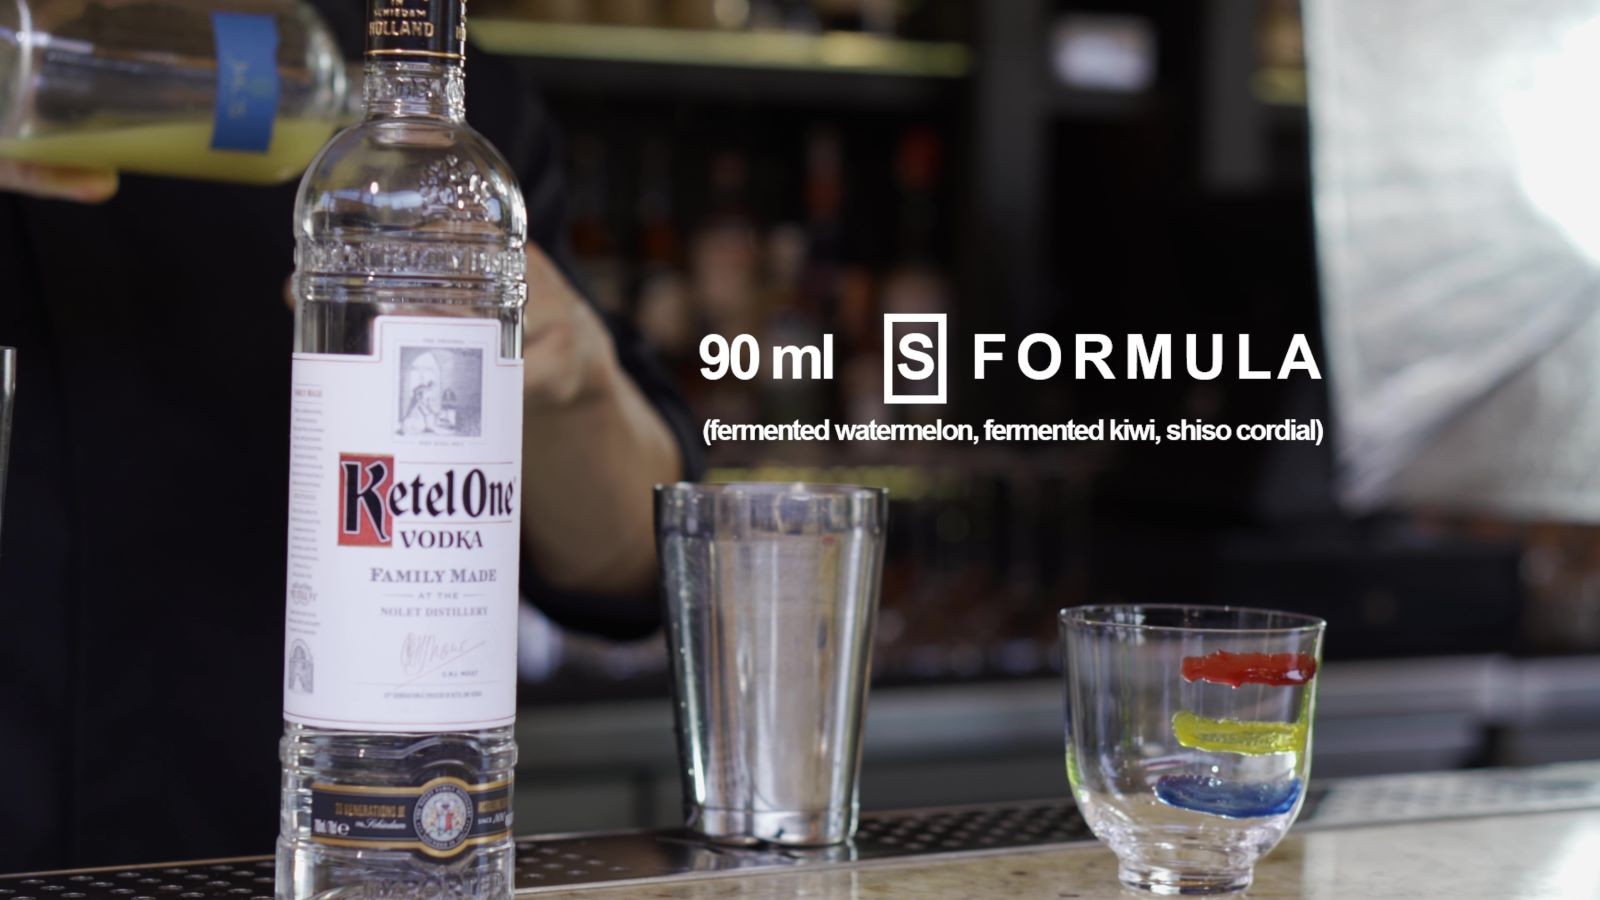 S Formula made by Ketel One and local products of Ibiza